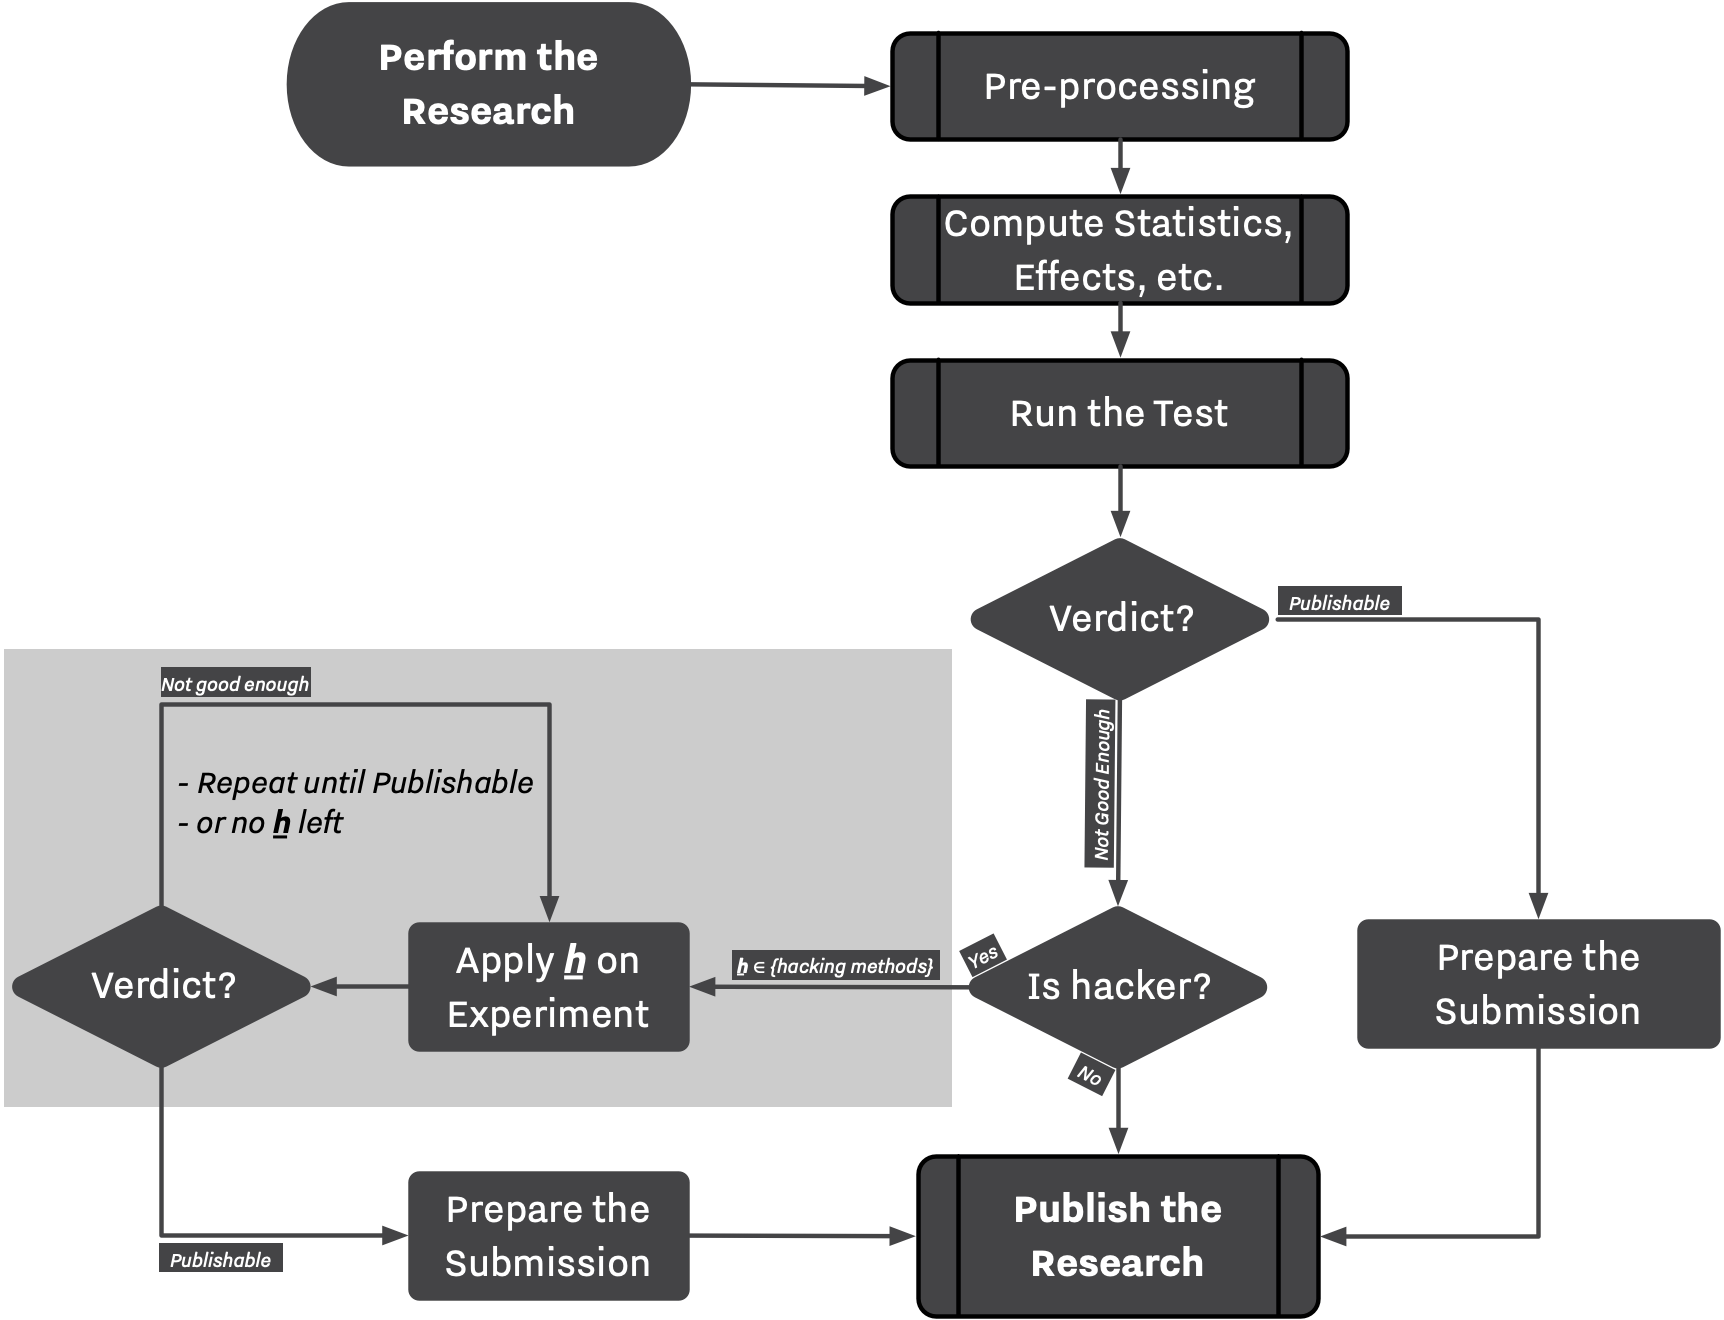 Figure 4. Steps involved in performing the research